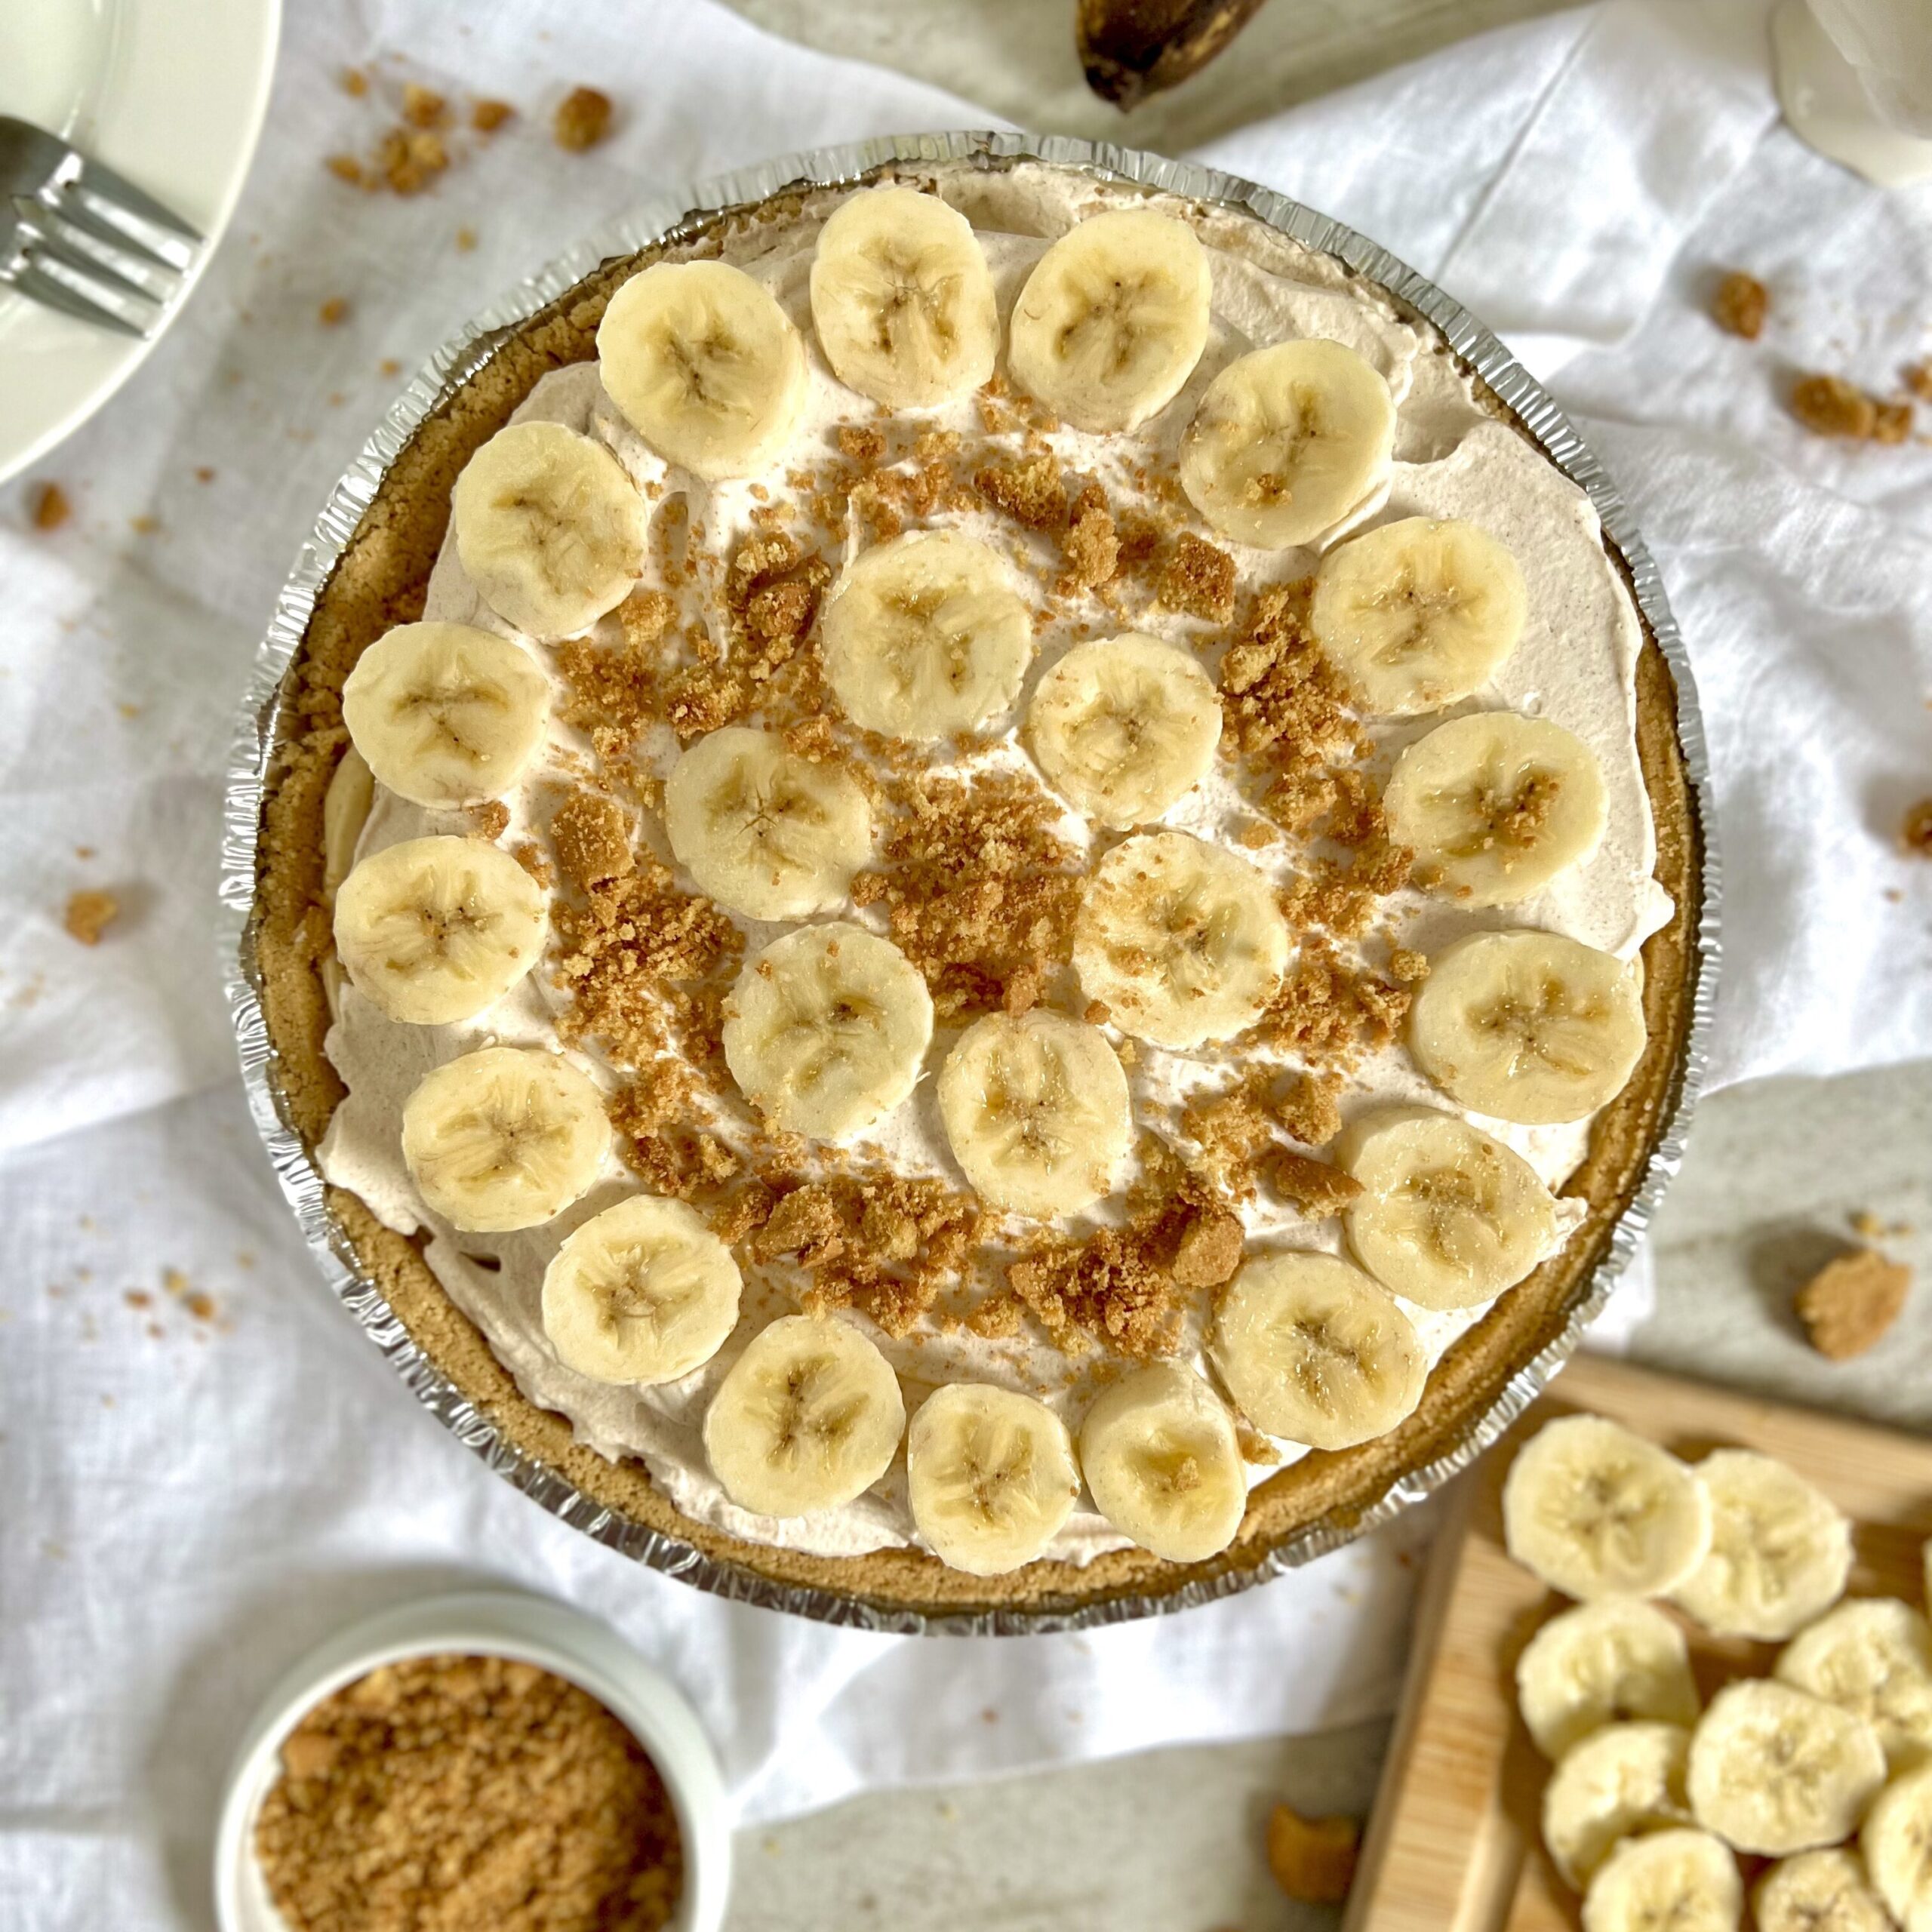 Banana Pudding Pie topped with whipped cream and decorated with rings of ripe bananas and crushed Nila wafers between rings of banana slices.